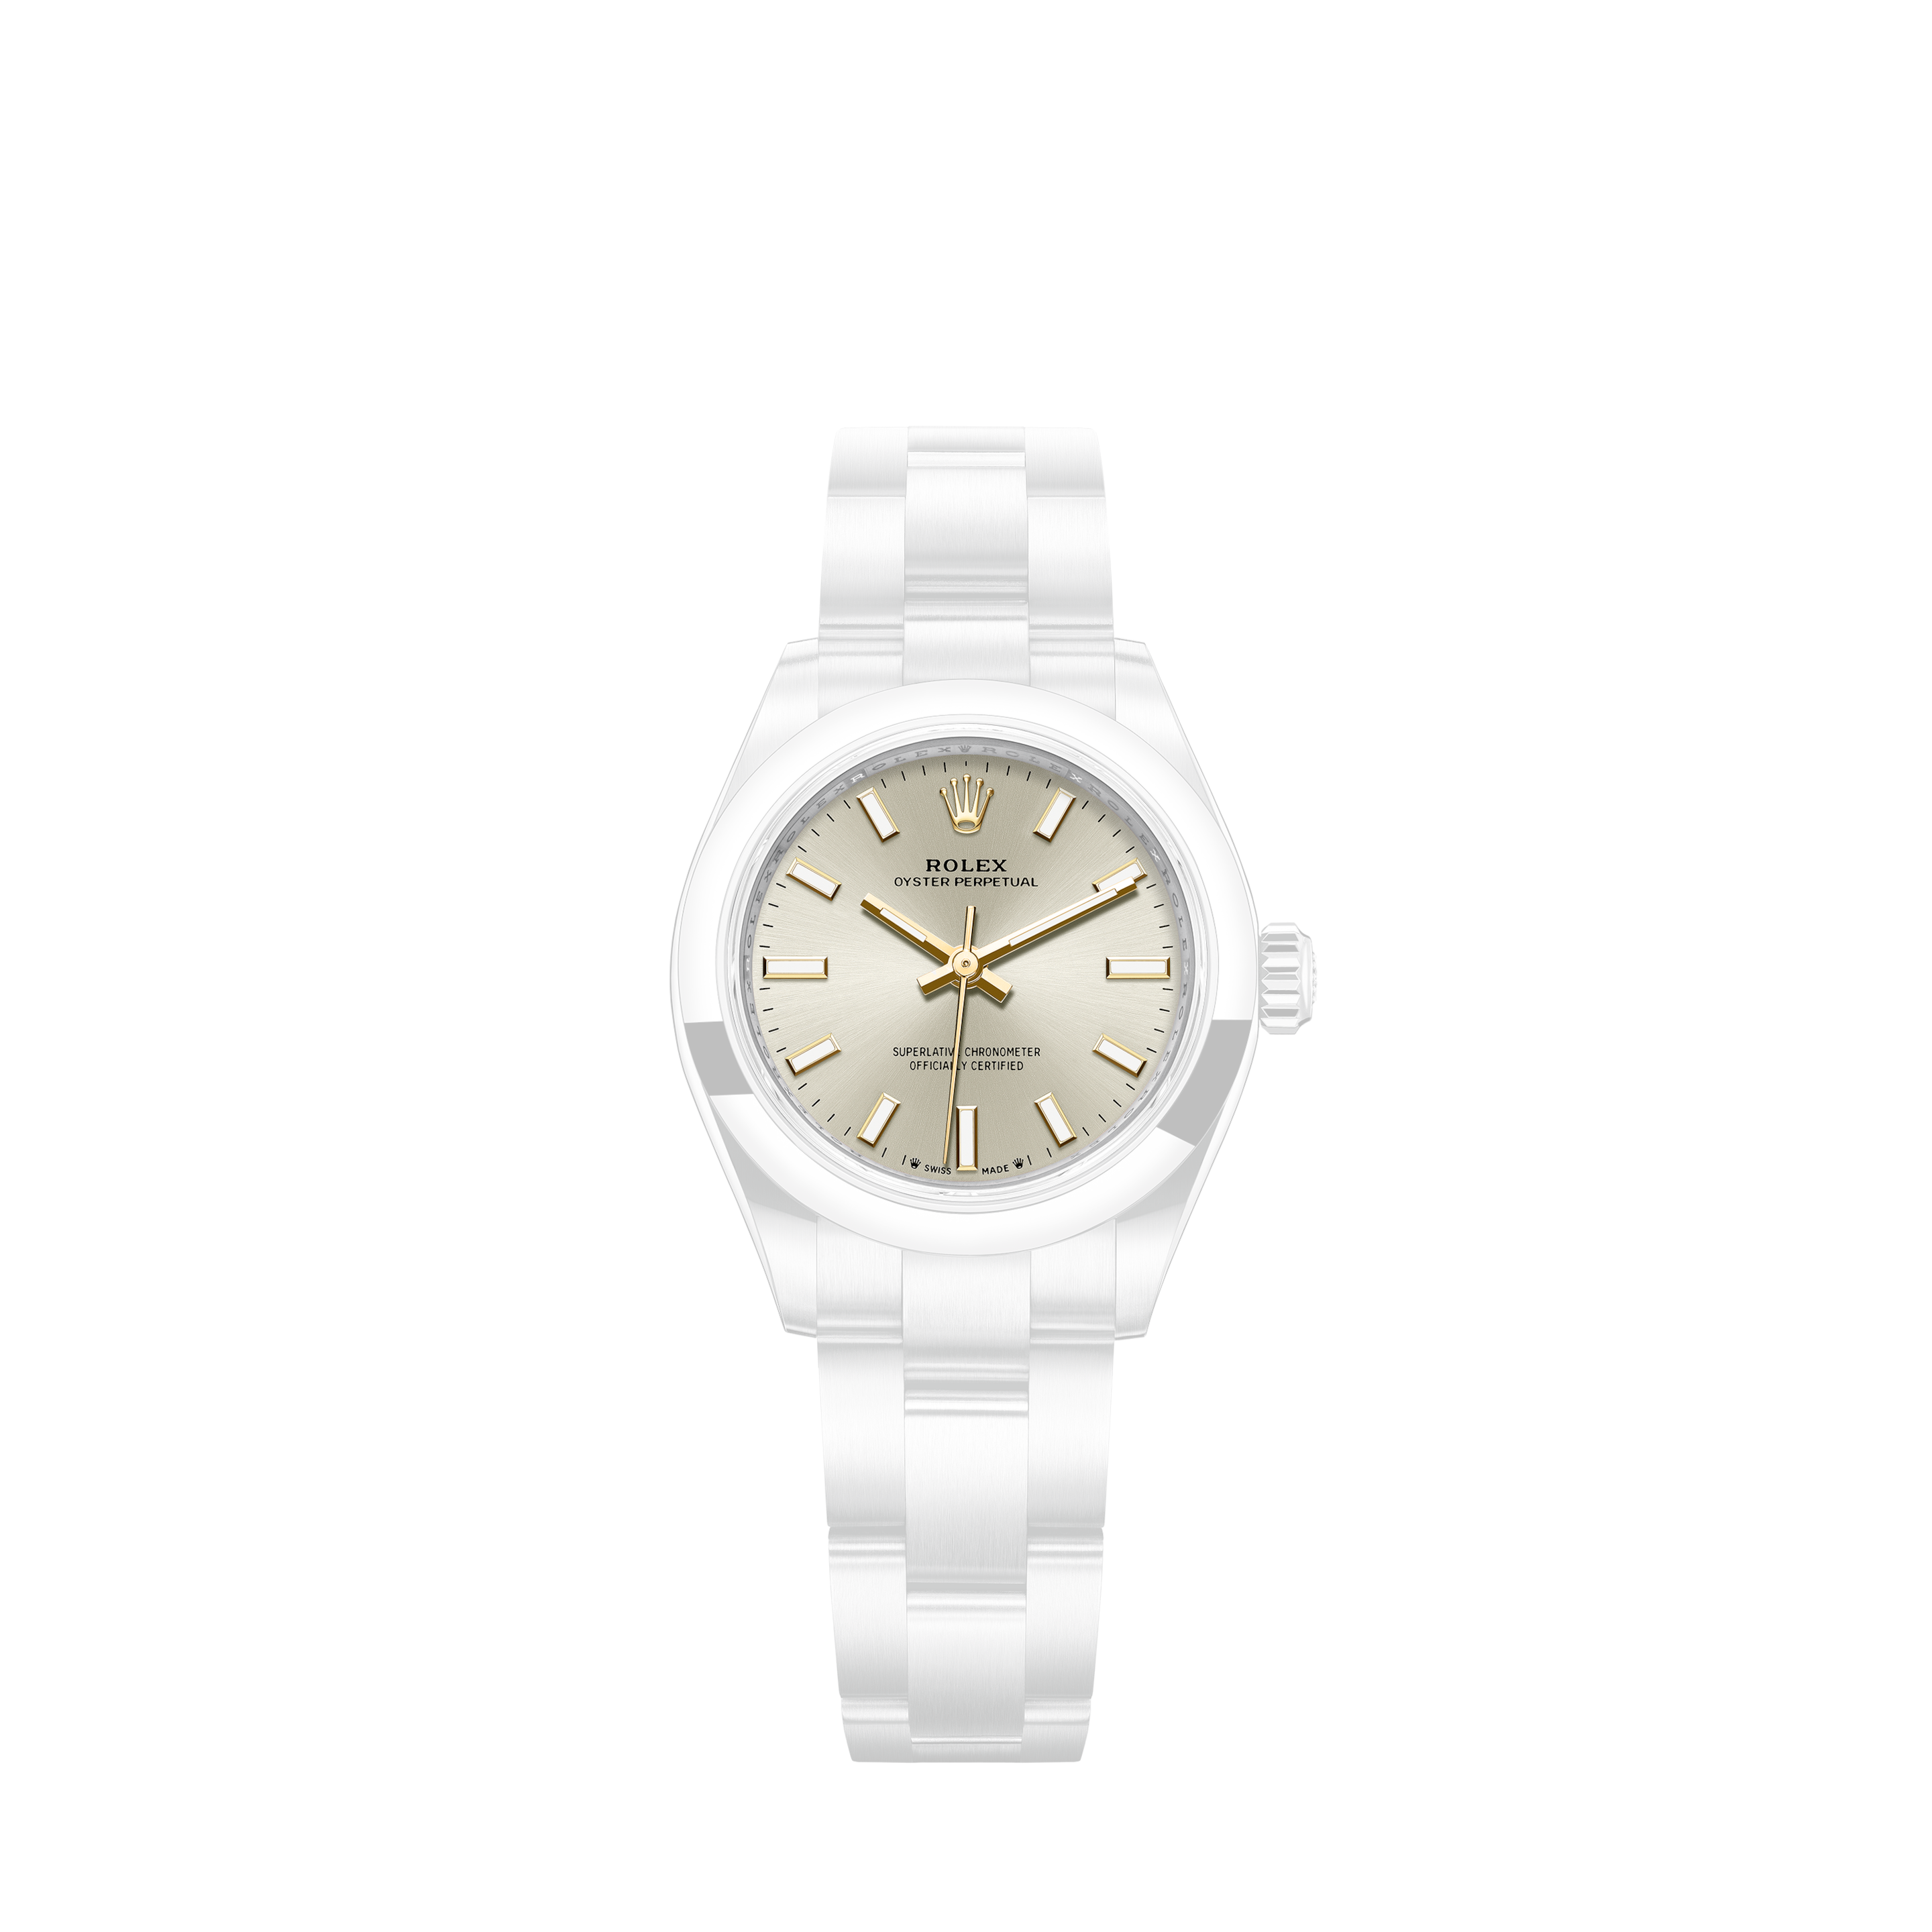 Rolex Datejust 36 Diamond Dial Stainless Steel & Gold